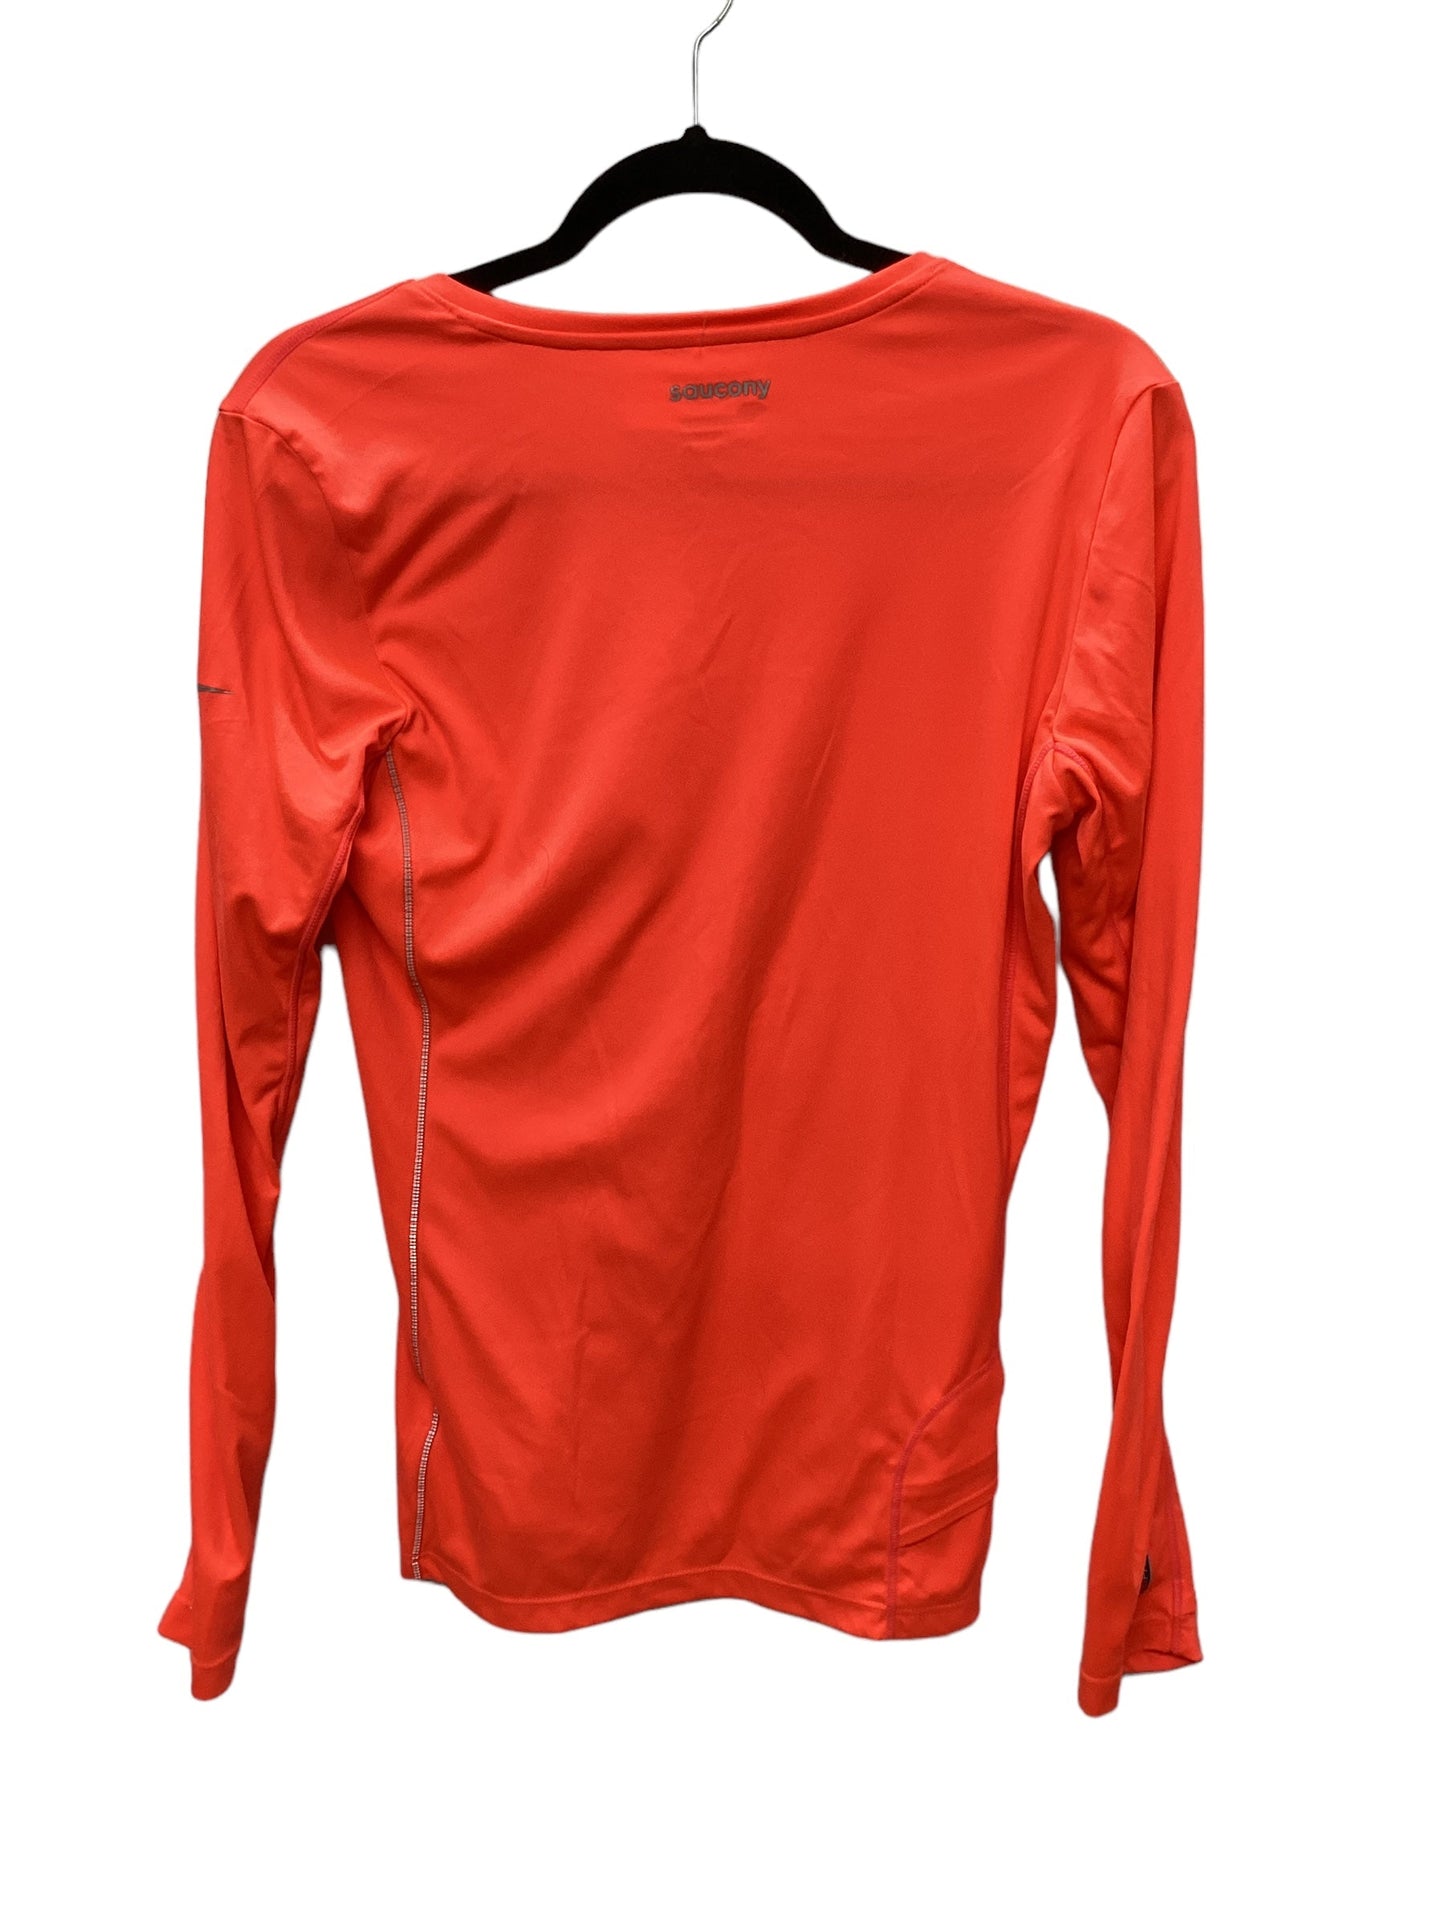 Athletic Top Long Sleeve Crewneck By Saucony  Size: M